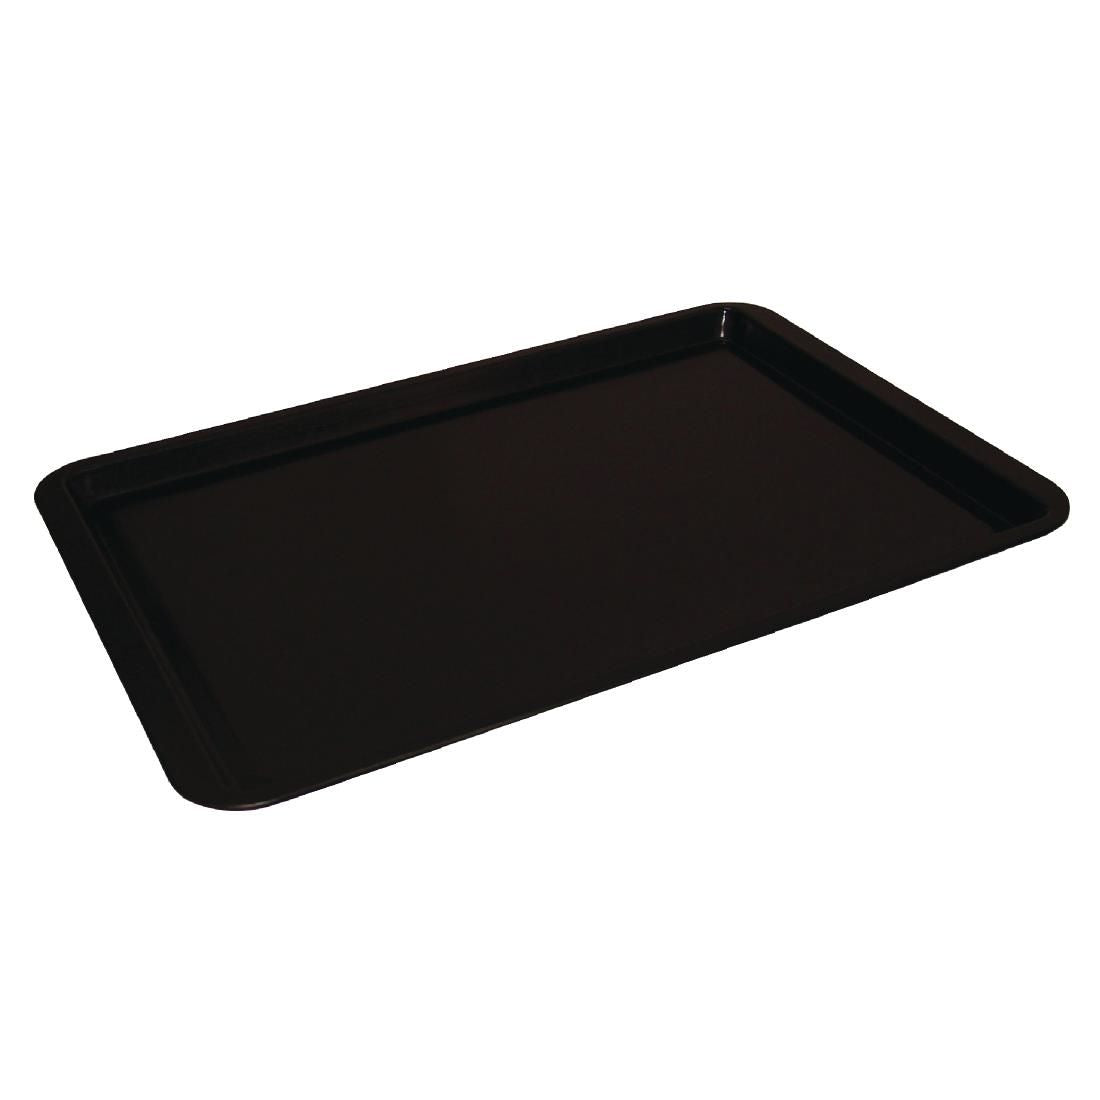 GD016 Vogue Non-Stick Carbon Steel Baking Tray 482 x 305mm JD Catering Equipment Solutions Ltd